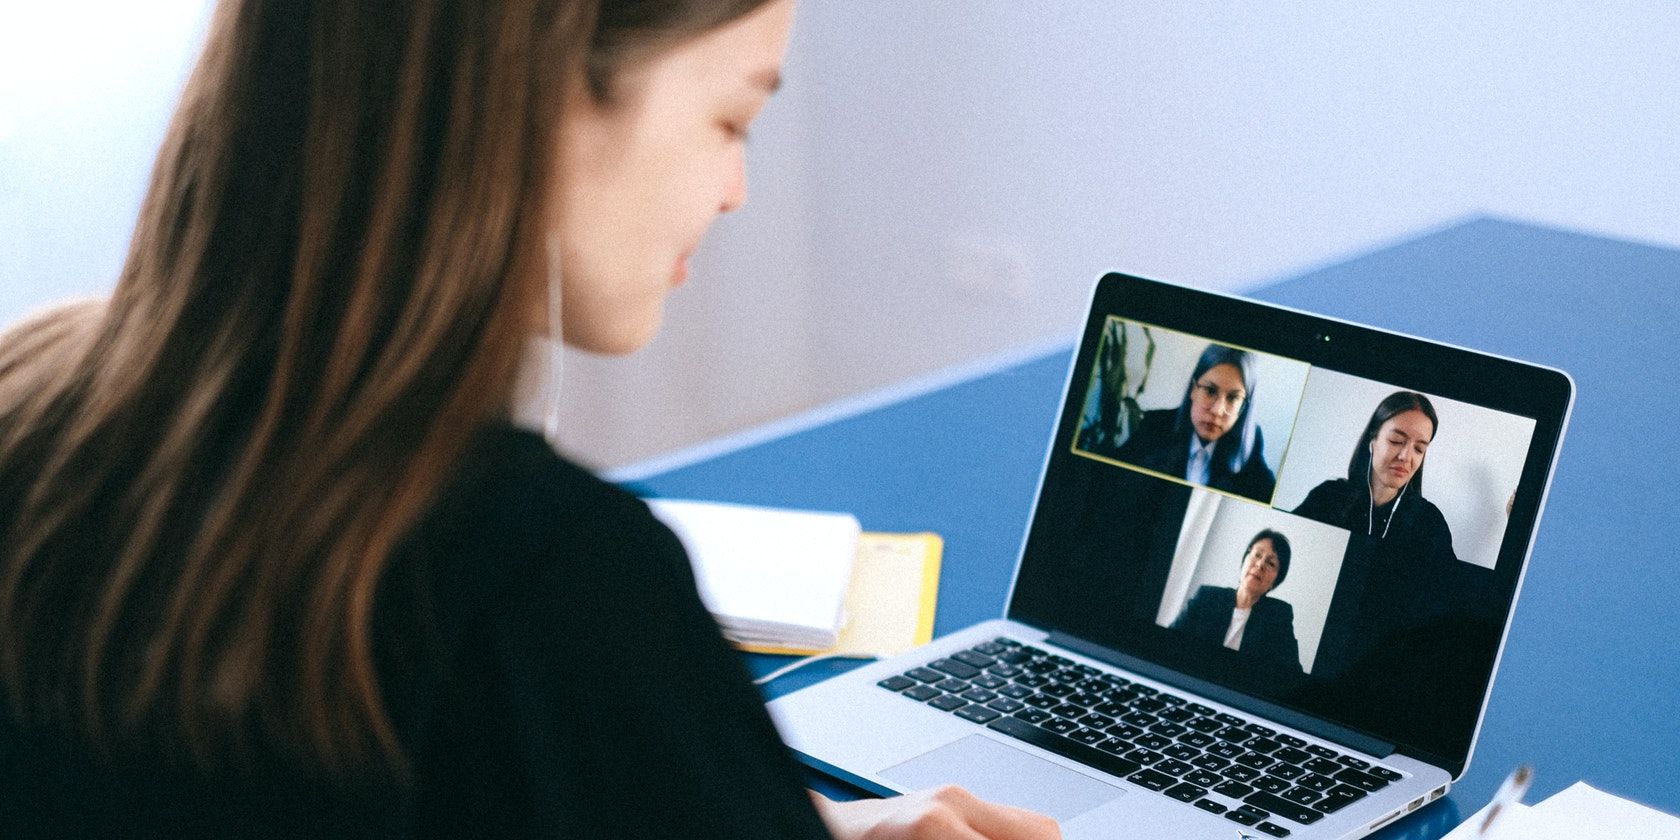 Woman using her laptop and attending an online meeting with three other people